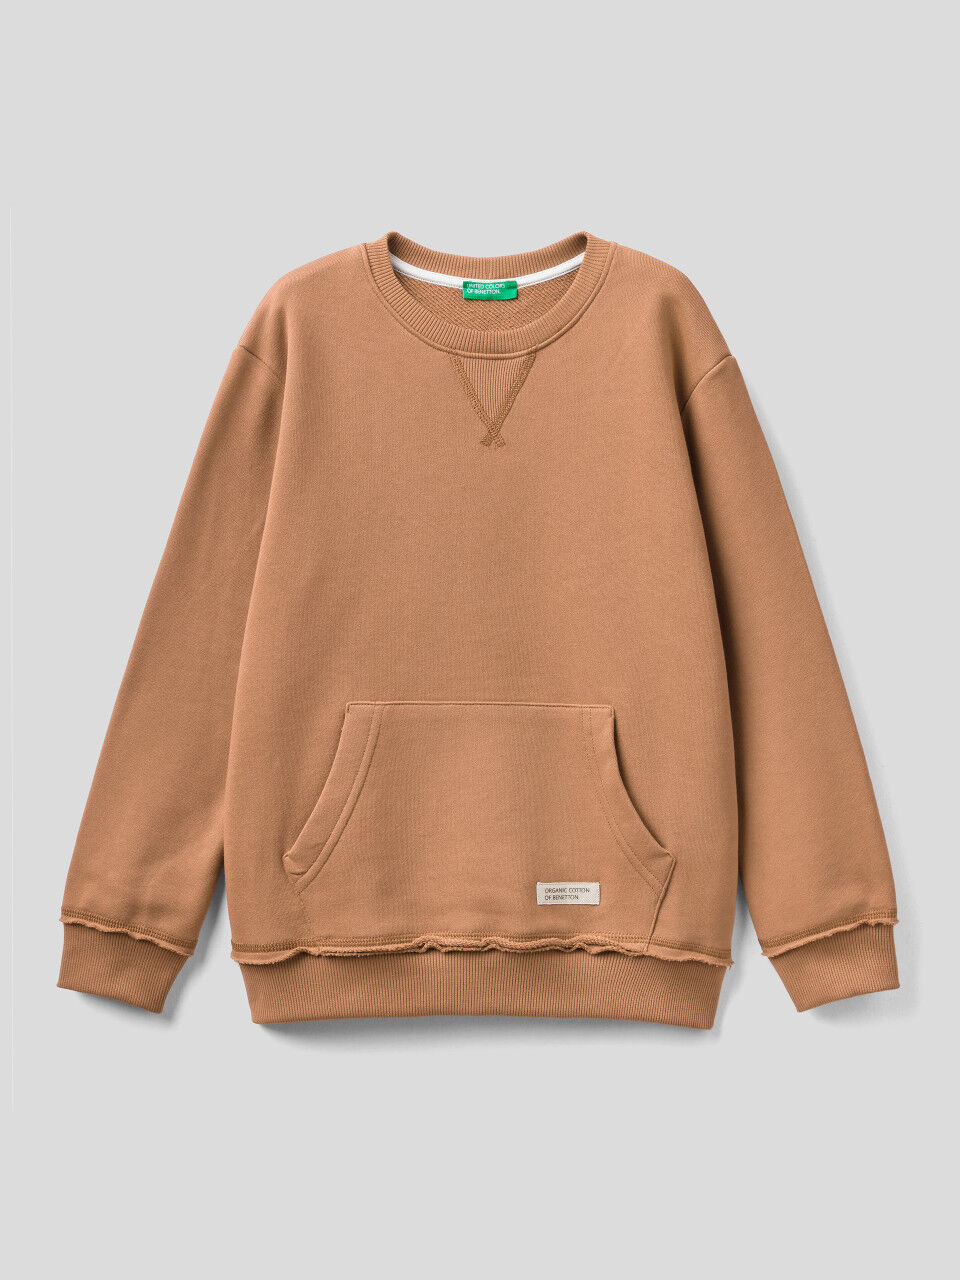 United Colors of Benetton Jungen Pullover 